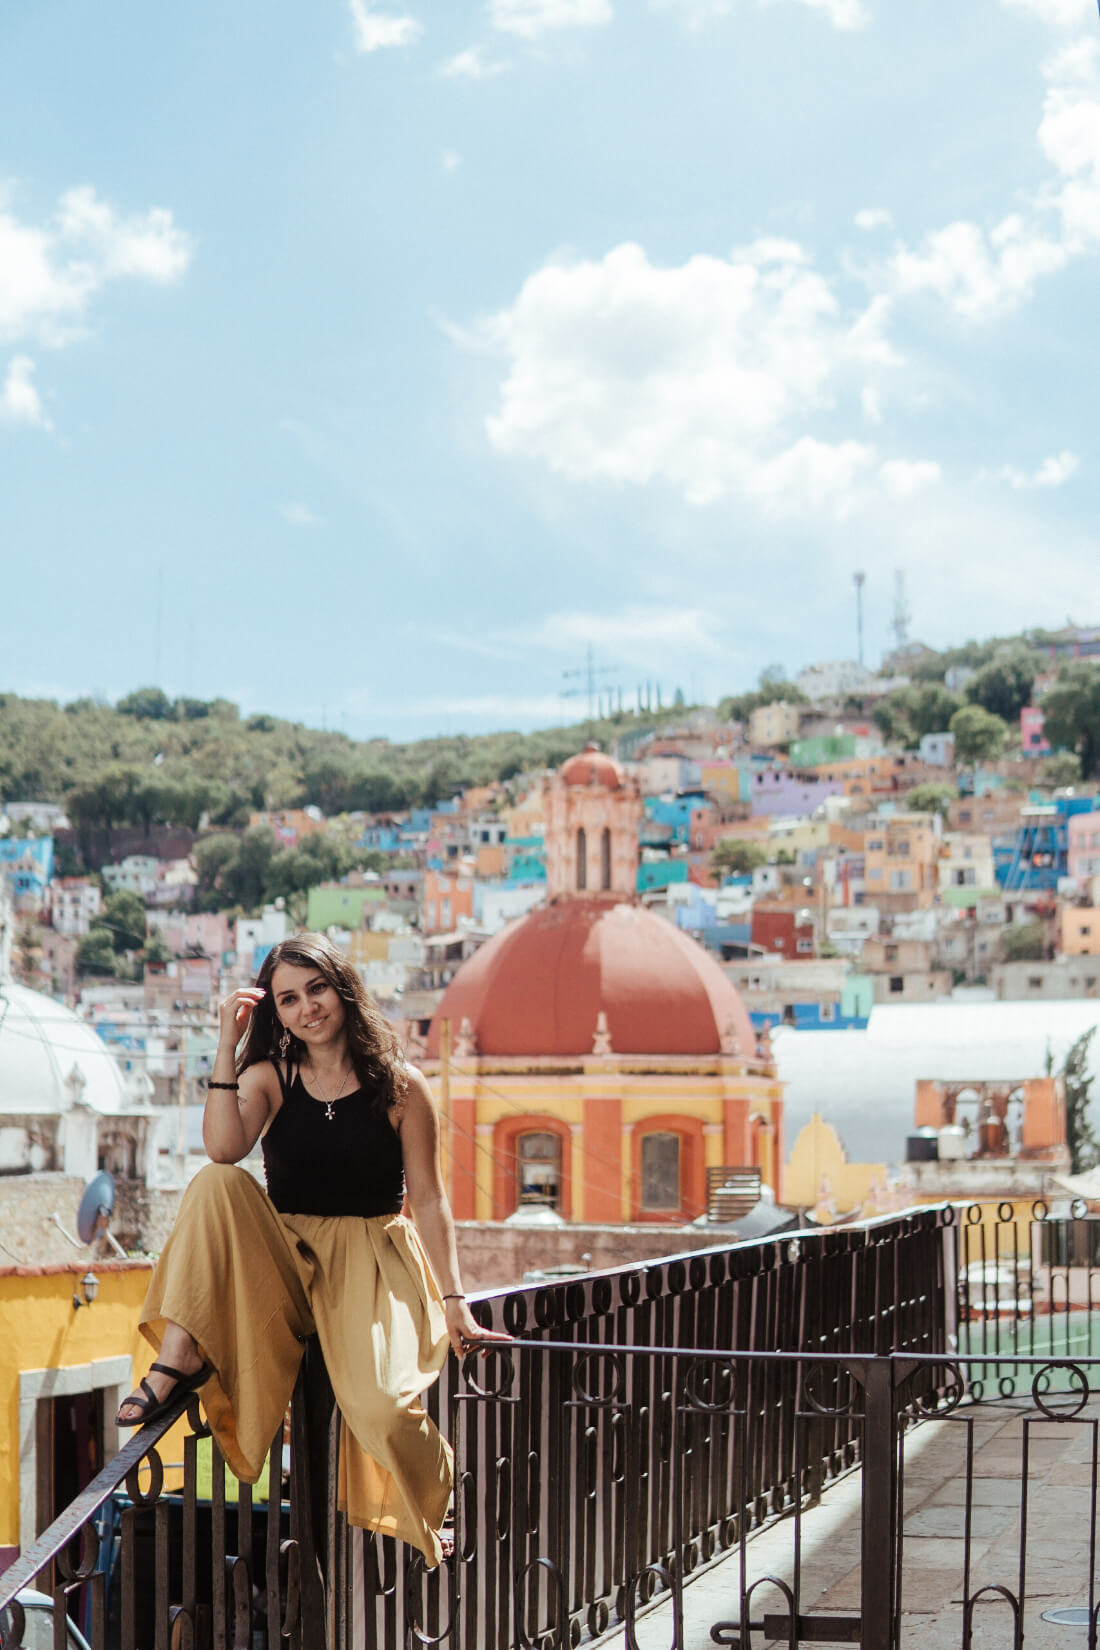 Stacey Valle sitting on a metal railing with a backdrop of colorful houses on the hillside behind her